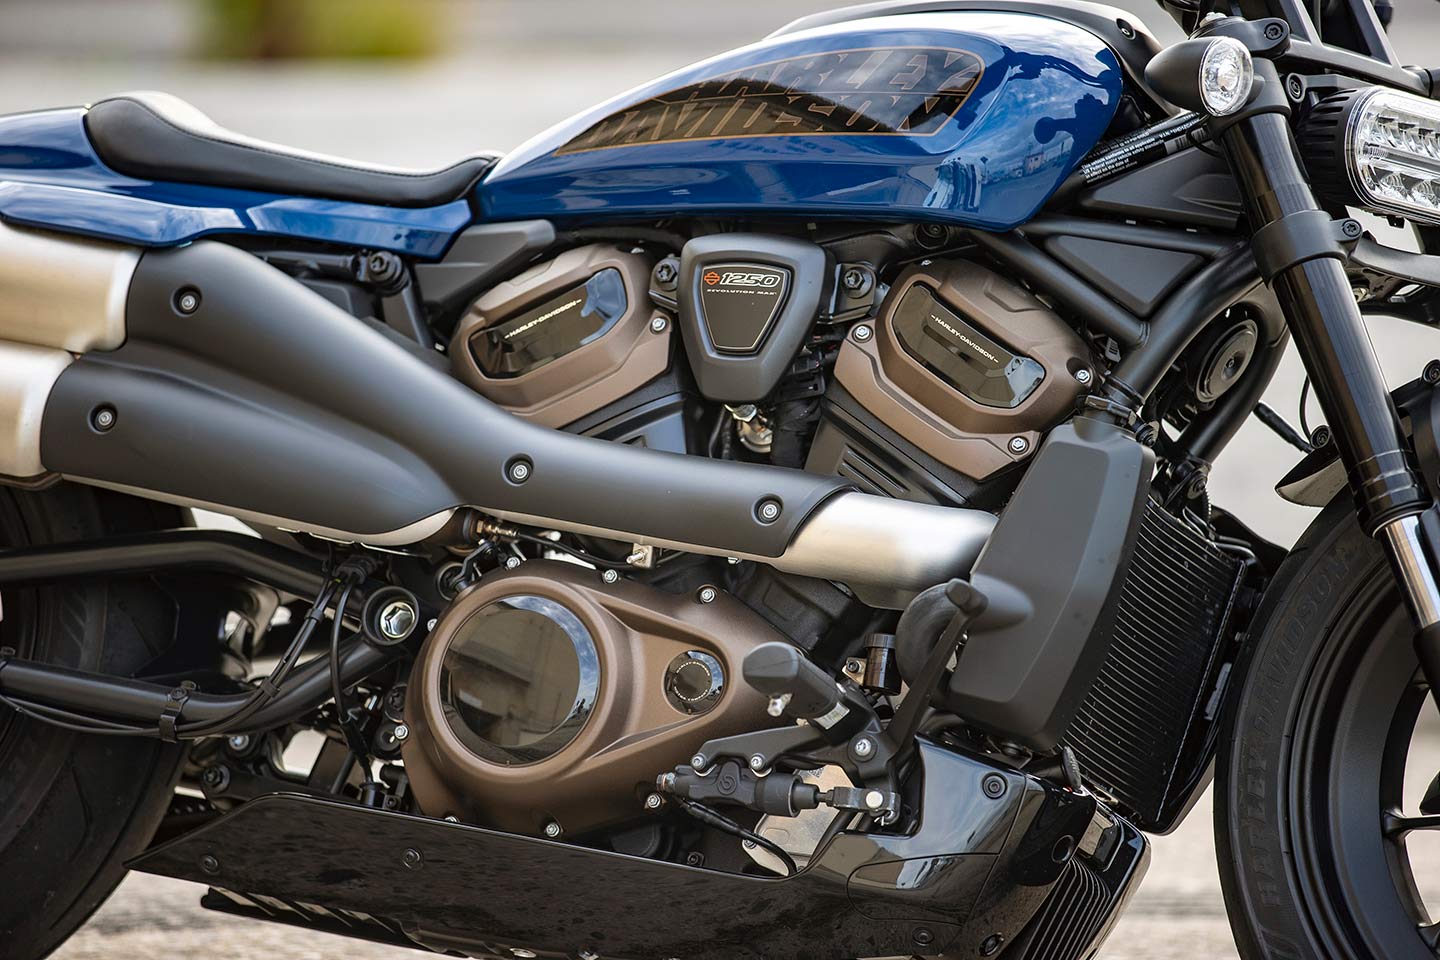 2021 Harley-Davidson Sportster S Review (14 Fast Facts)